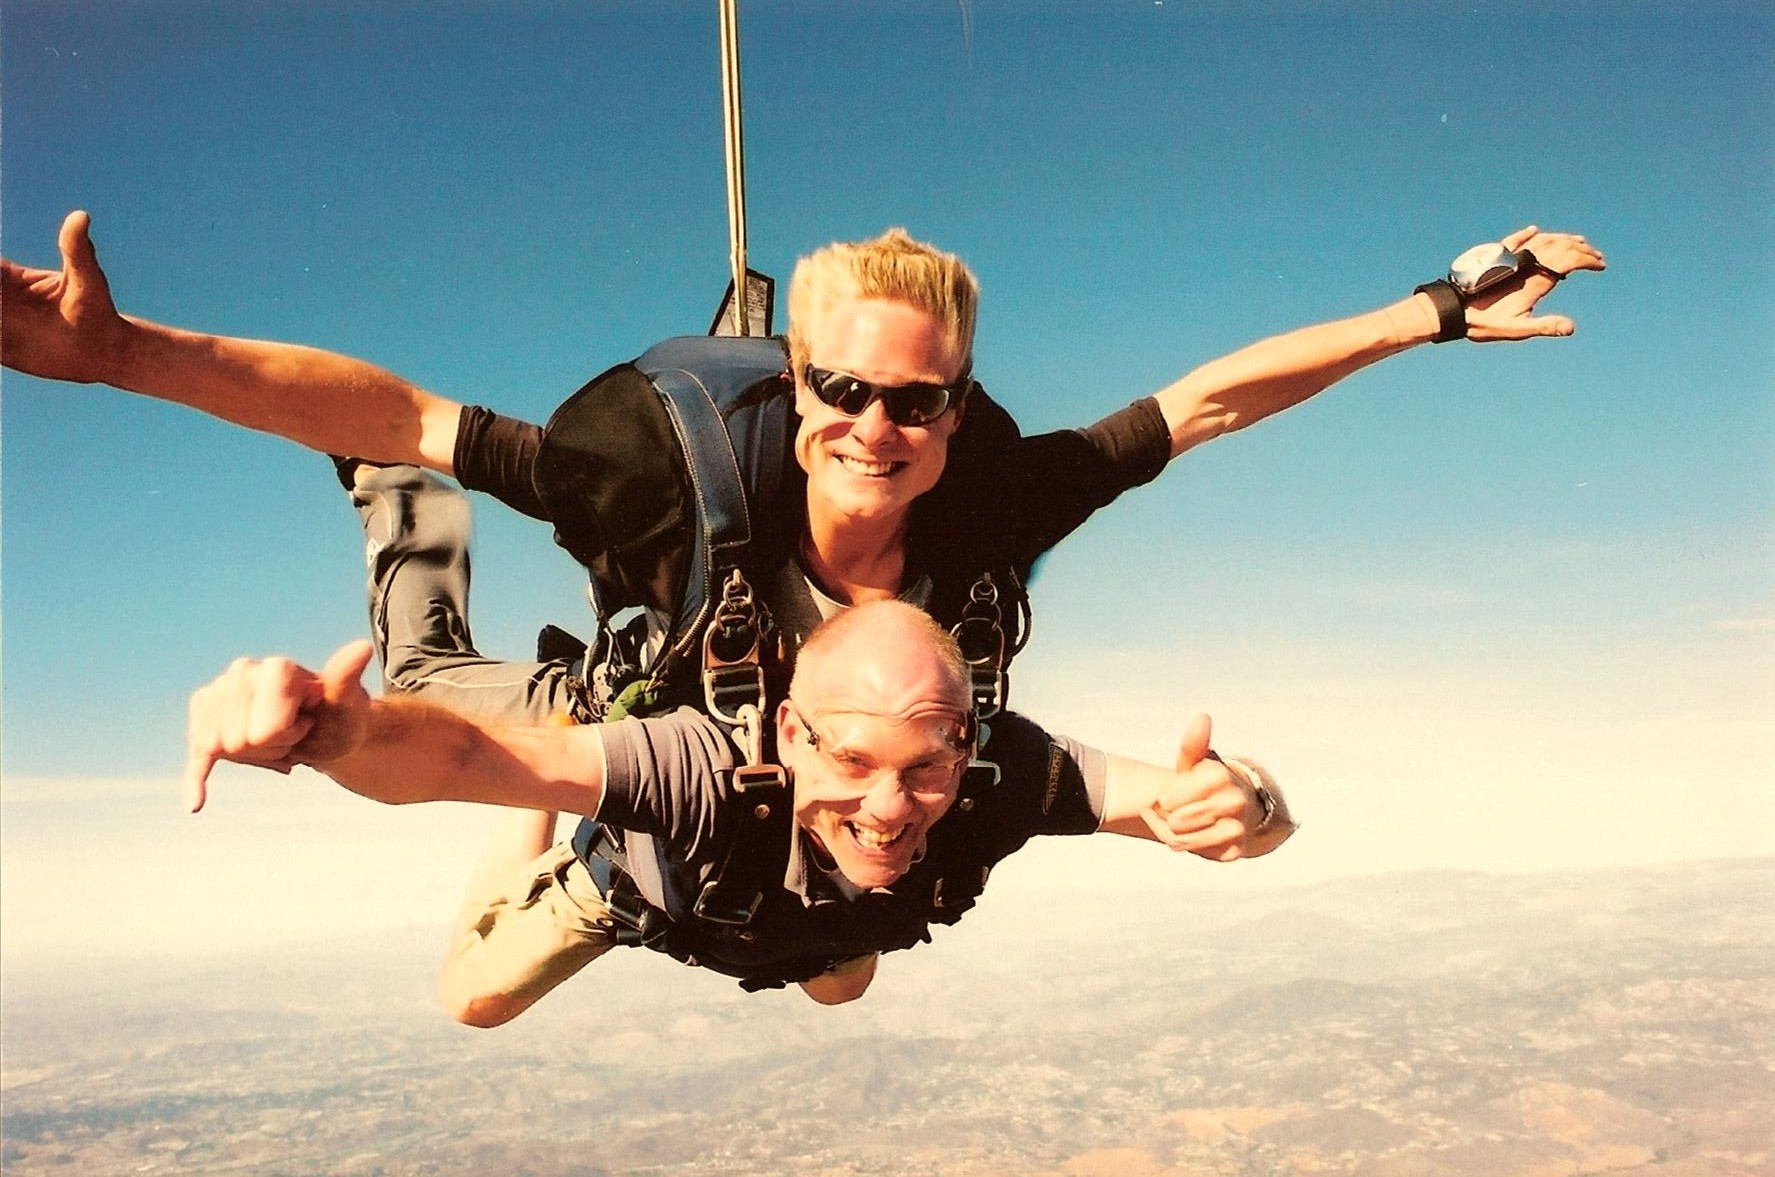 Moi Strapped to surfer dude tandem parachute jump